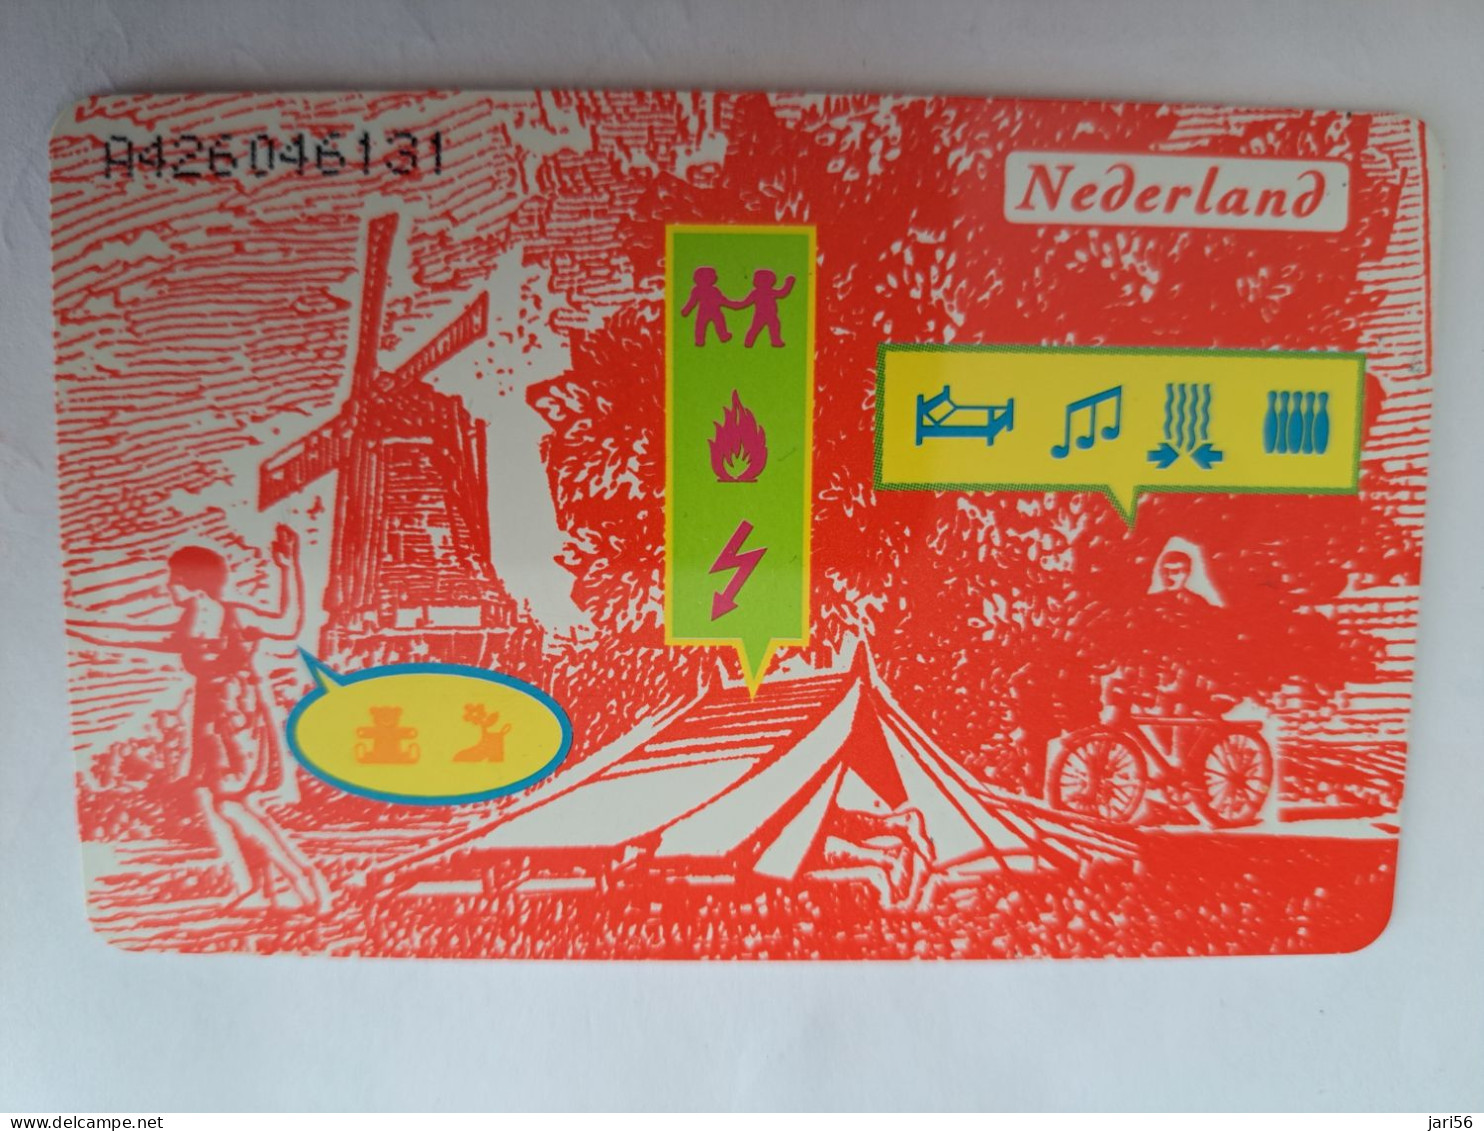 NETHERLANDS CHIPCARD / HFL 10 ,- HOLIDAY/ CONDOM/ SAFE SEX/     - USED CARD  ** 14008** - Publiques